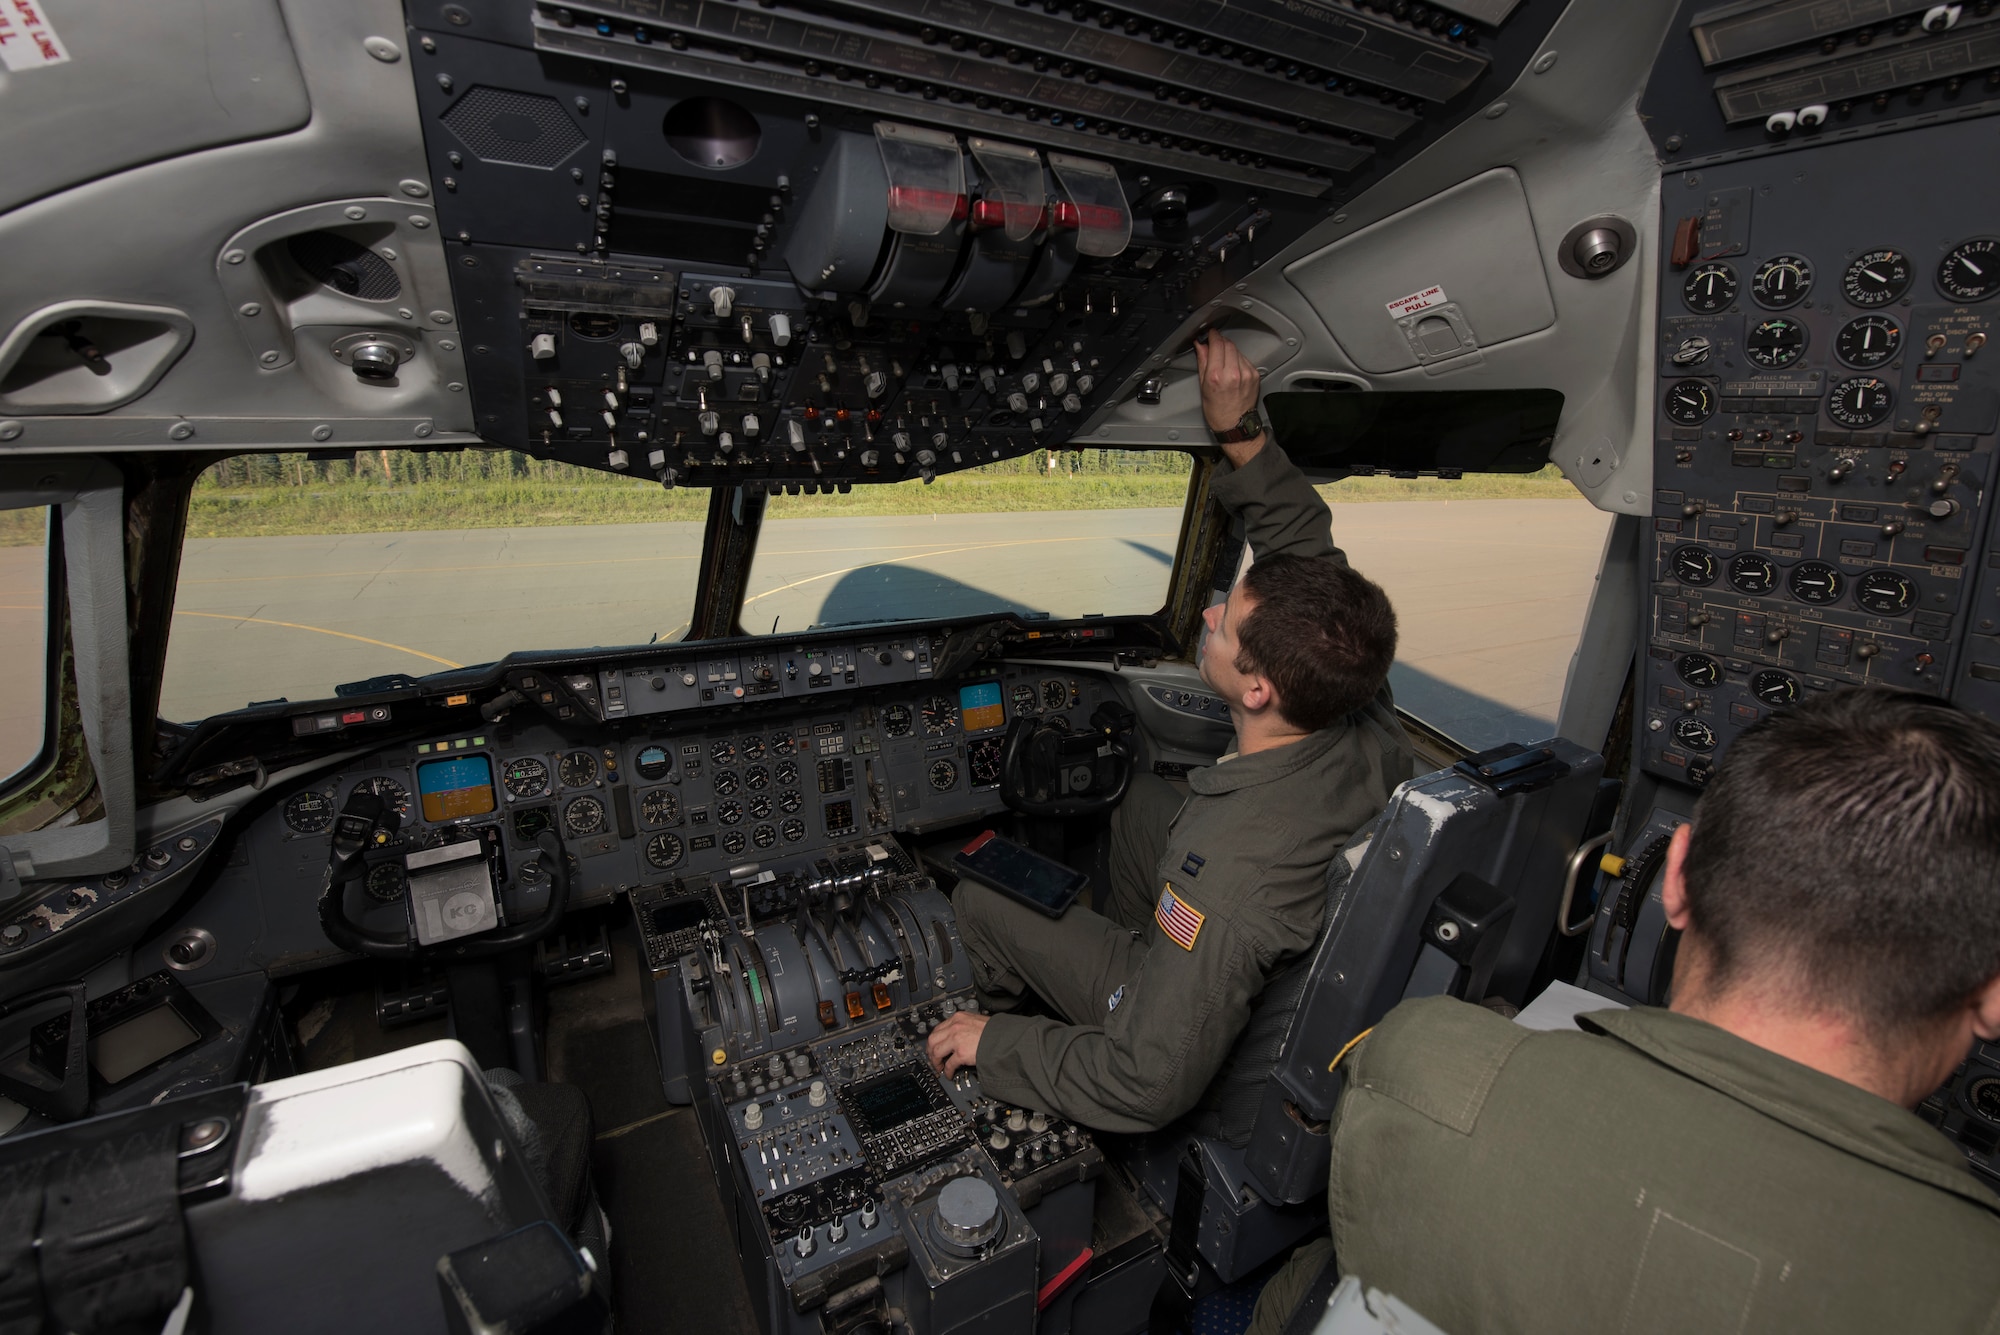 U.S. Air Force Capt. Eddie Miller, 6th Air Refueling Squadron assistant flight commander for the mission support flight and a KC-10 aircraft commander, conducts a flight controls check in the cockpit of a KC-10 at Eielson Air Force Base, Alaska, June 6, 2018. The aircraft completed a five-day mission which featured refueling U.S. Air Force F-15C Eagles and Japan Air Self-Defense Force fighter aircraft in the Indo-Pacific Command area of operations. (U.S. Air Force photo by Tech. Sgt. James Hodgman)